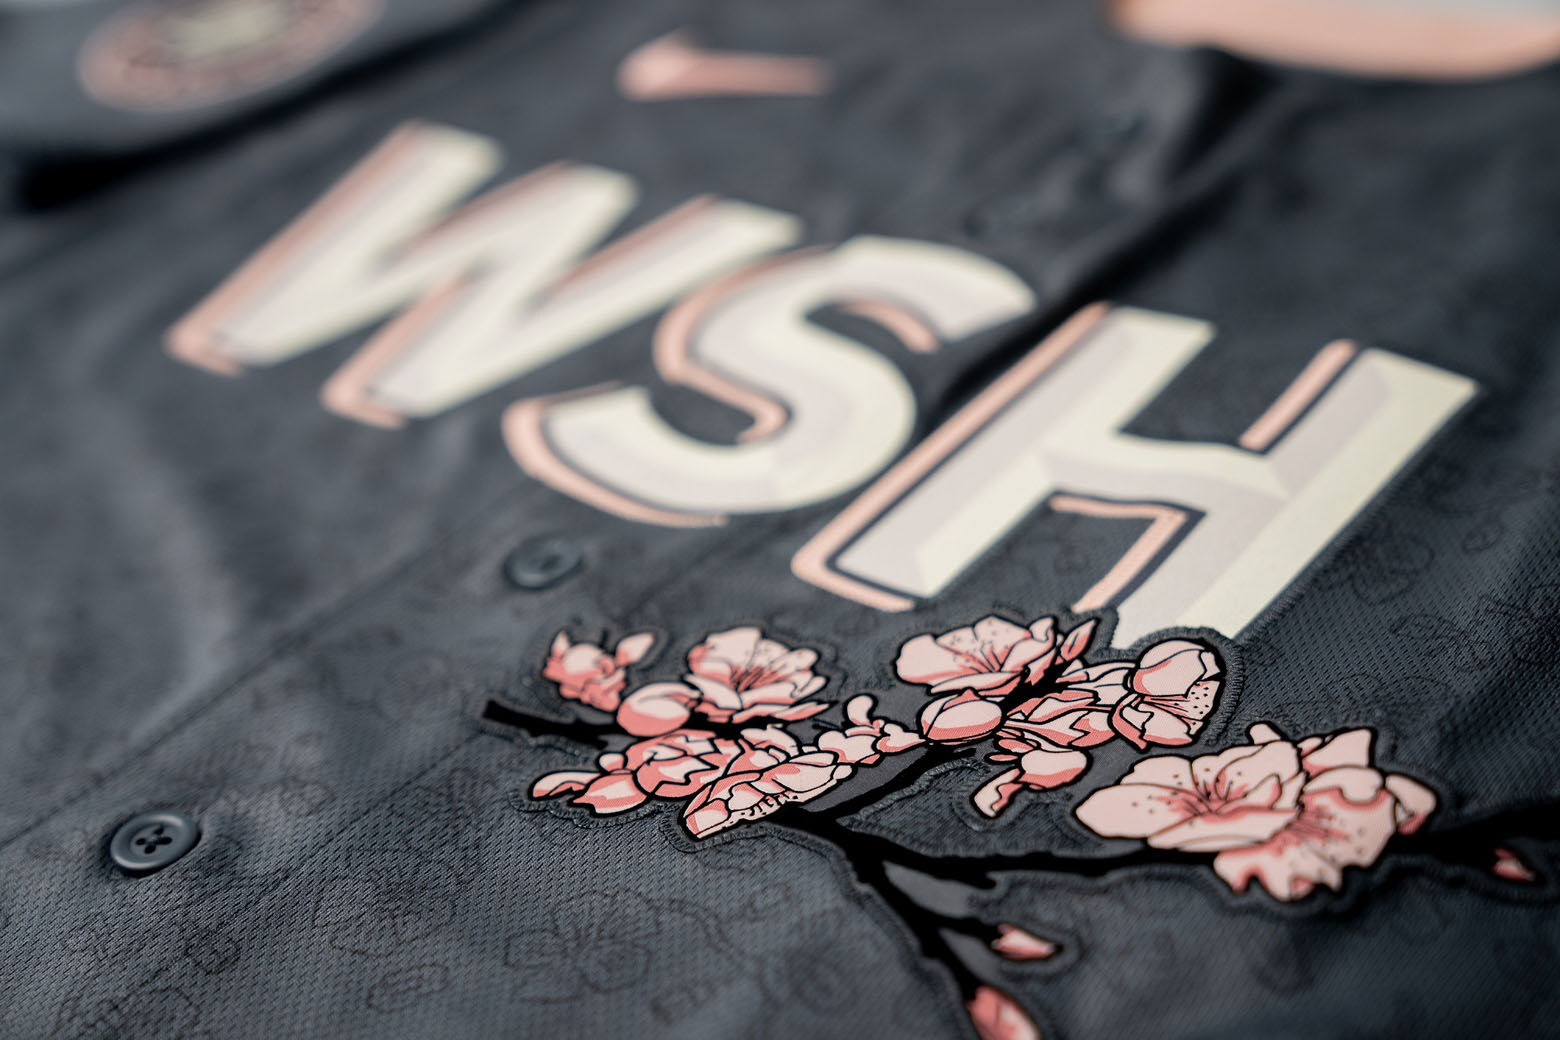 nationals cherry blossom jersey for sale